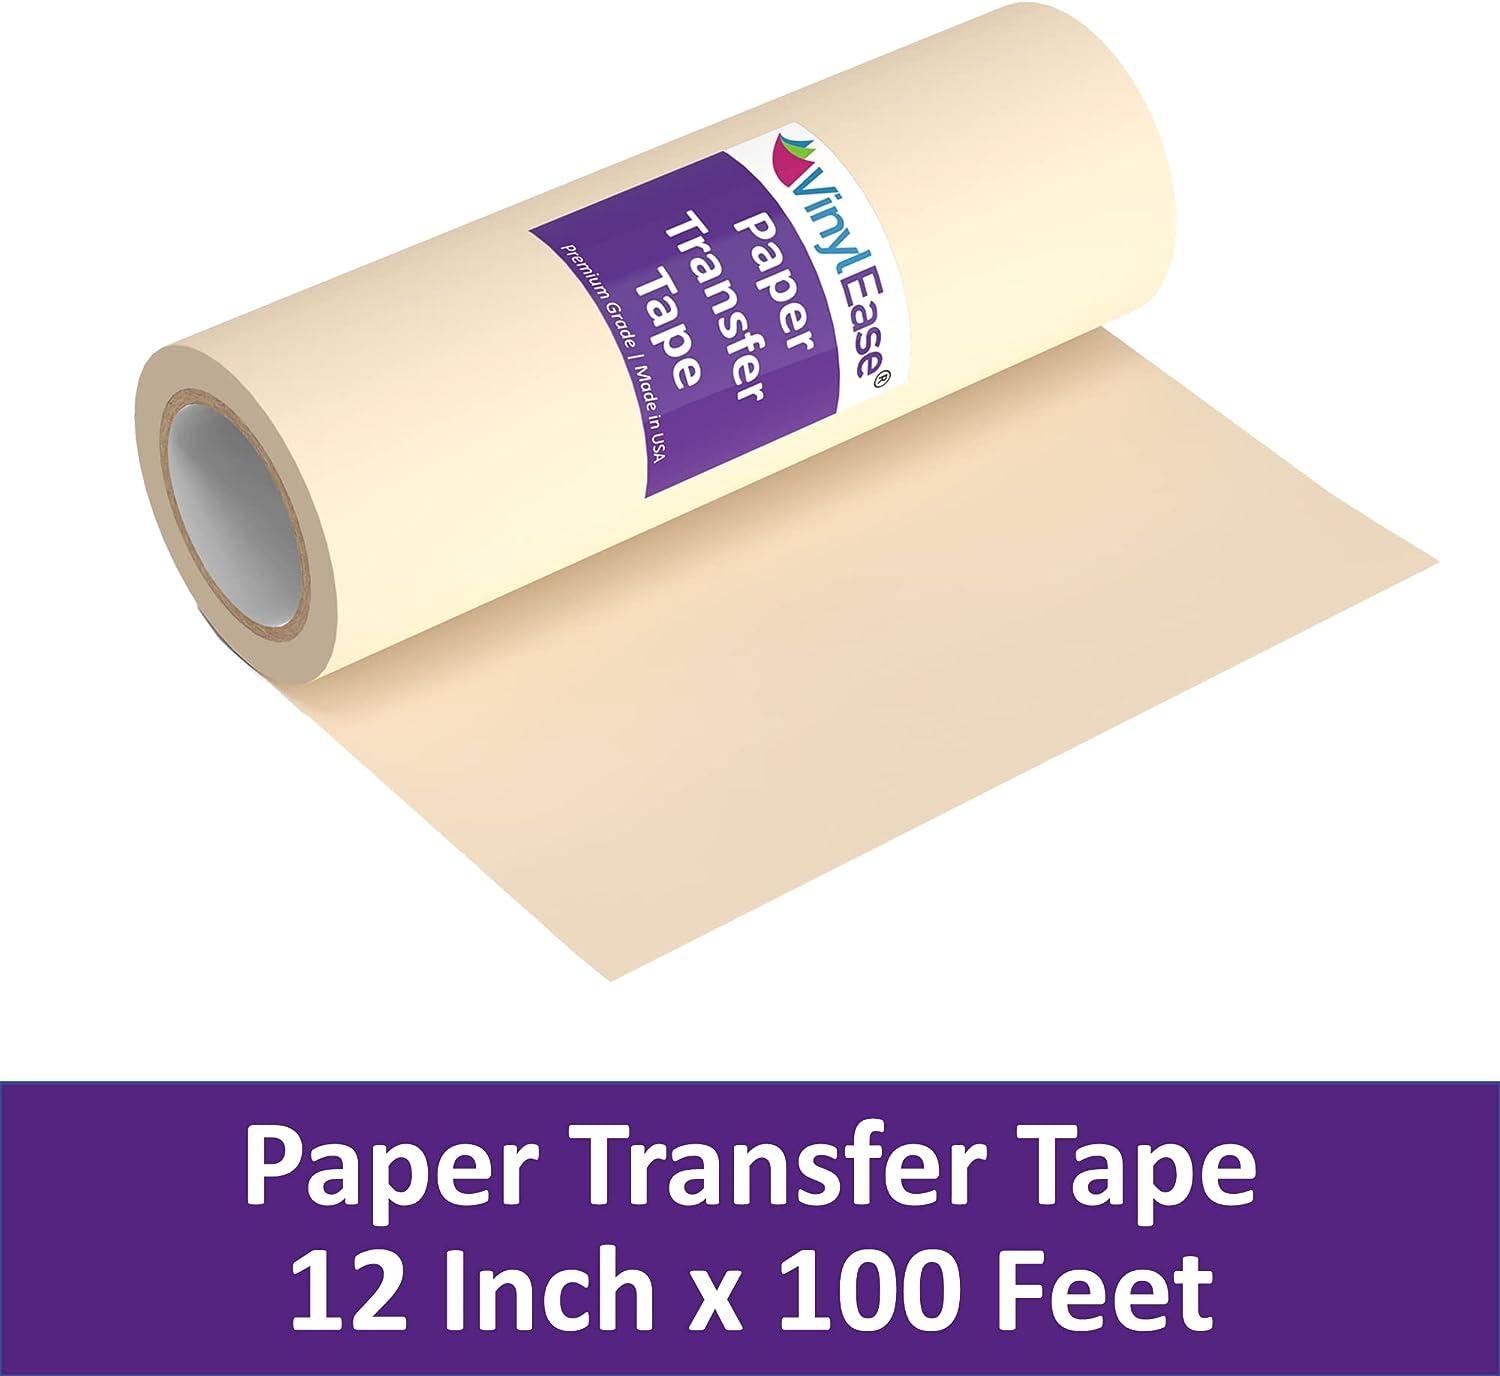 Vinyl Ease 12 inch x 20 Feet Roll of Clear Vinyl Transfer Tape with Grid Is A Medium Tack Adhesive, 1 inch grid. American Made Application Tape for